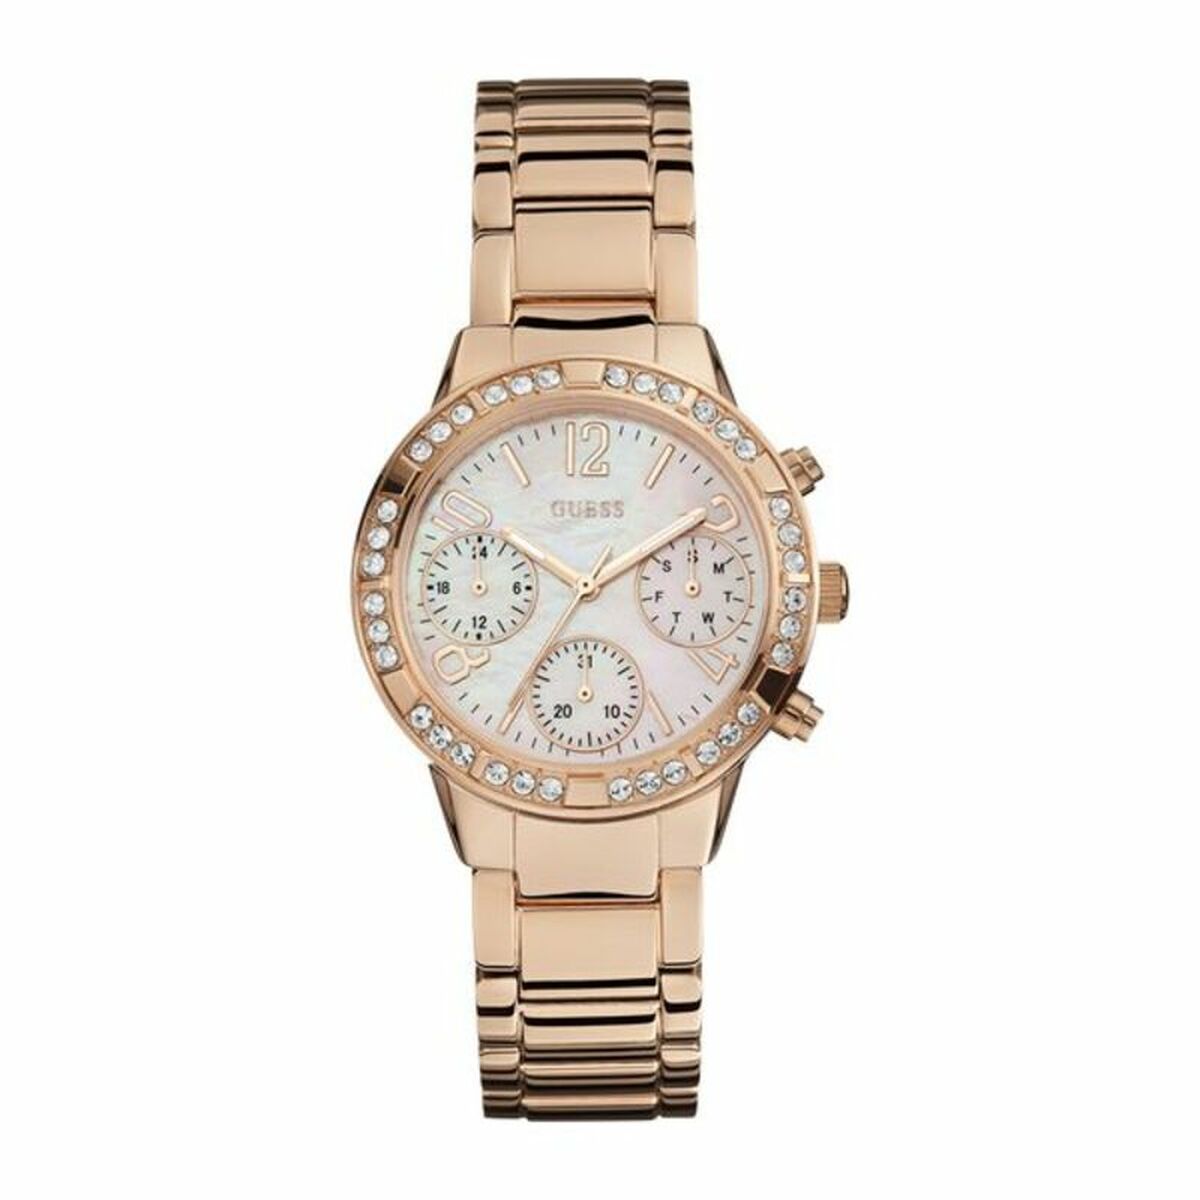 Ladies' Watch Guess W0546L3 (36 mm), Guess, Watches, Women, ladies-watch-guess-w0546l3-36-mm, Brand_Guess, category-reference-2570, category-reference-2635, category-reference-2662, category-reference-2682, category-reference-2995, category-reference-t-19667, category-reference-t-19725, Condition_NEW, fashion, original gifts, Price_100 - 200, RiotNook